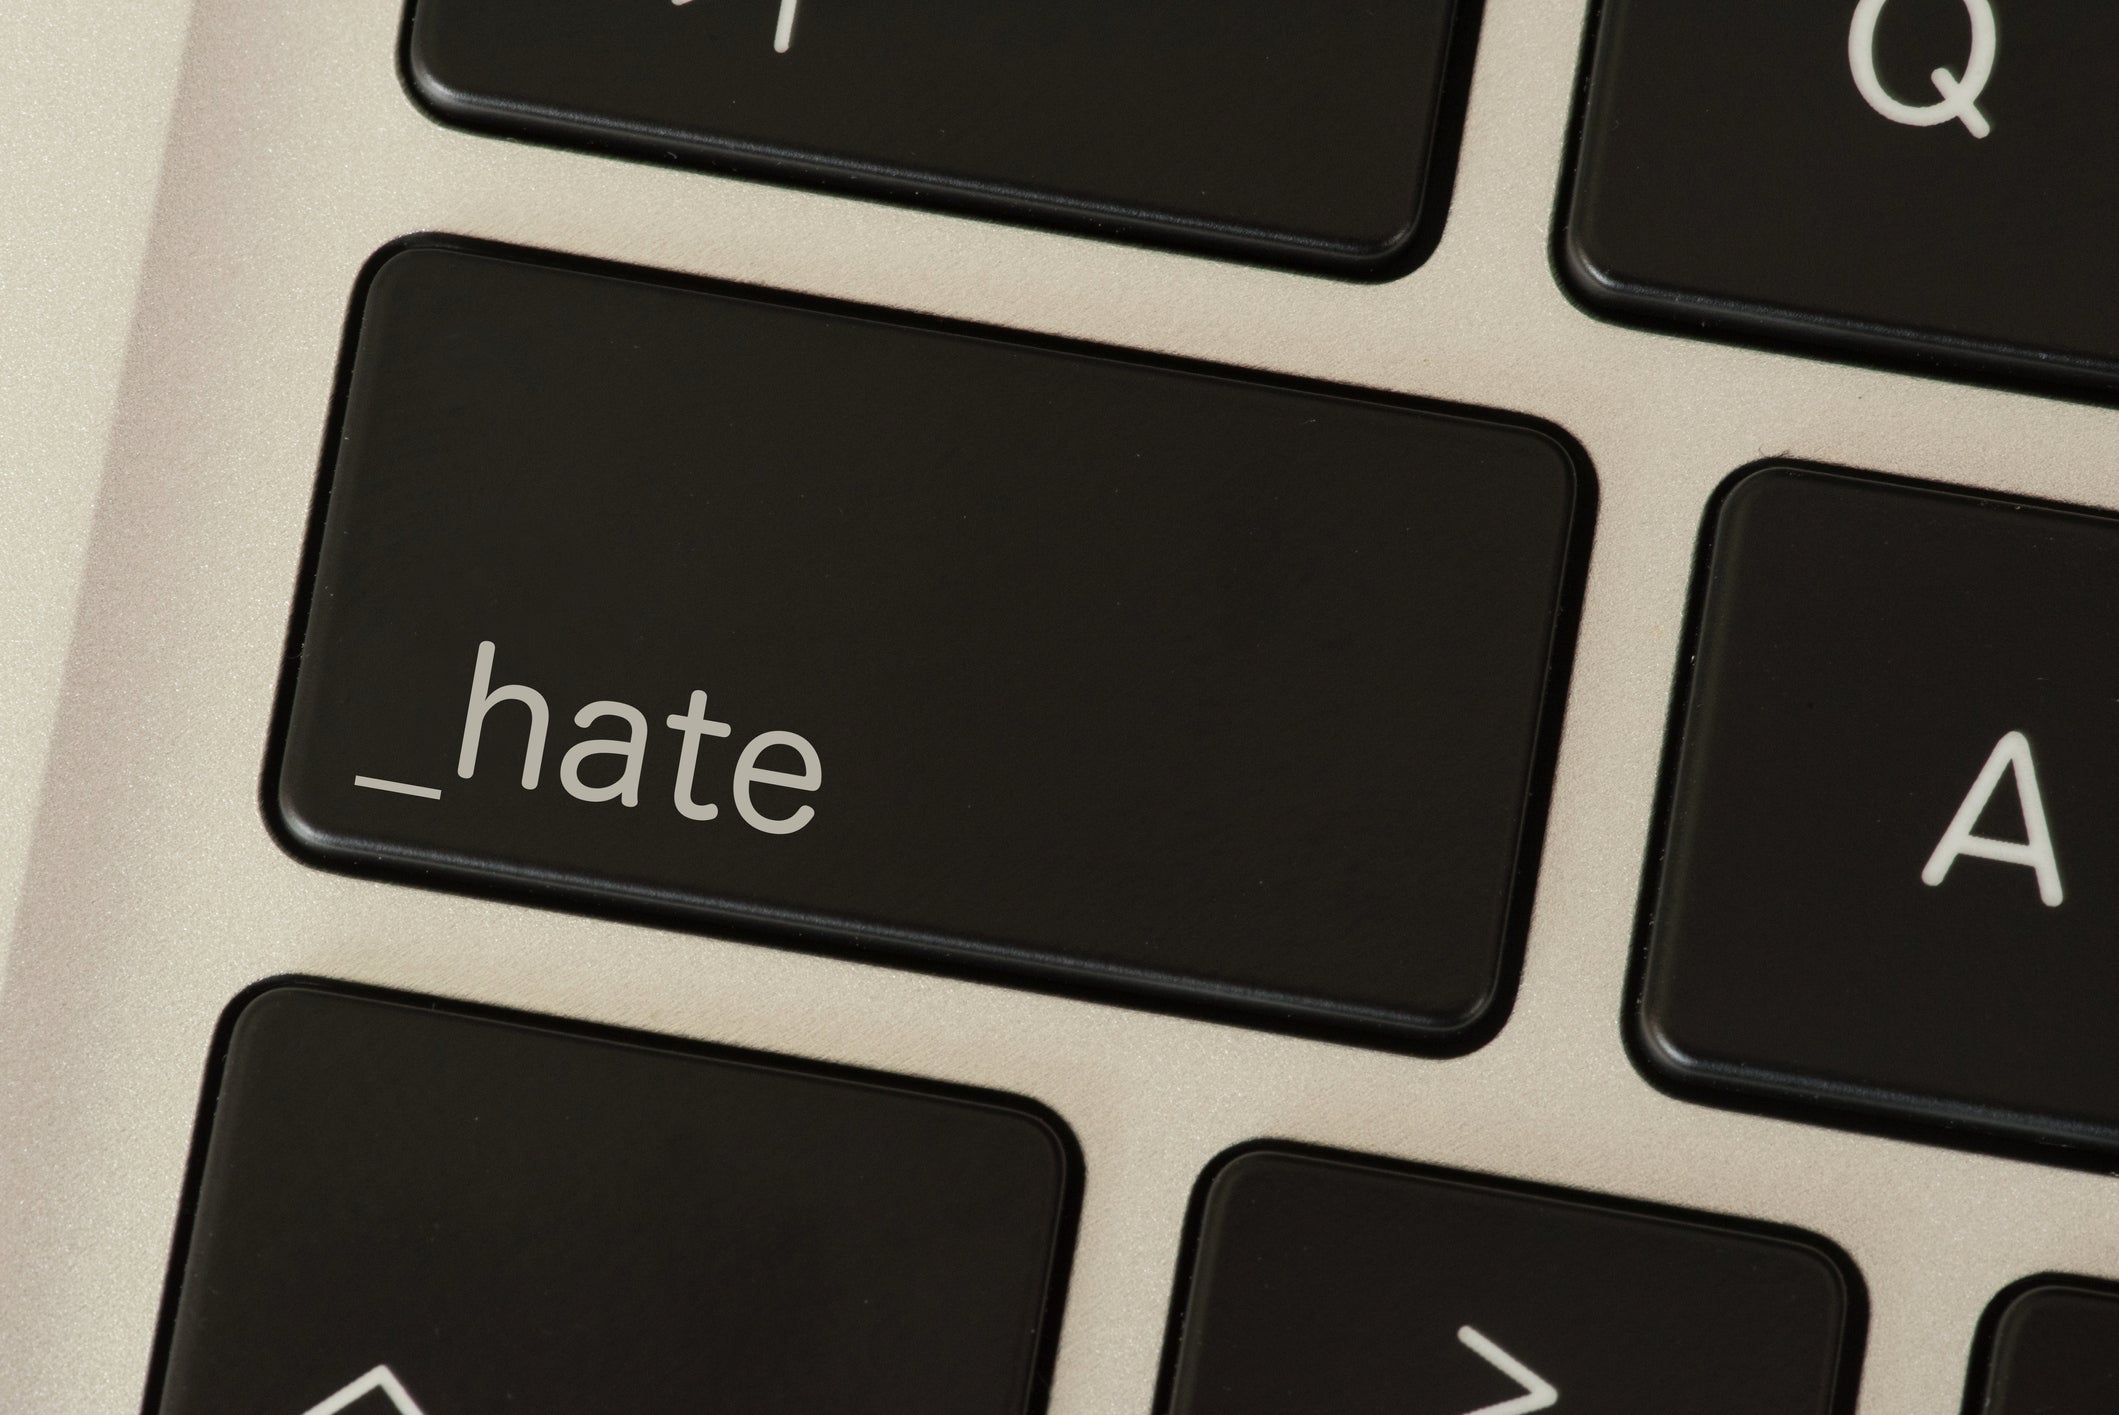 With online abuse on the rise, proposed government legislation to prevent 'online harm' should be welcomed